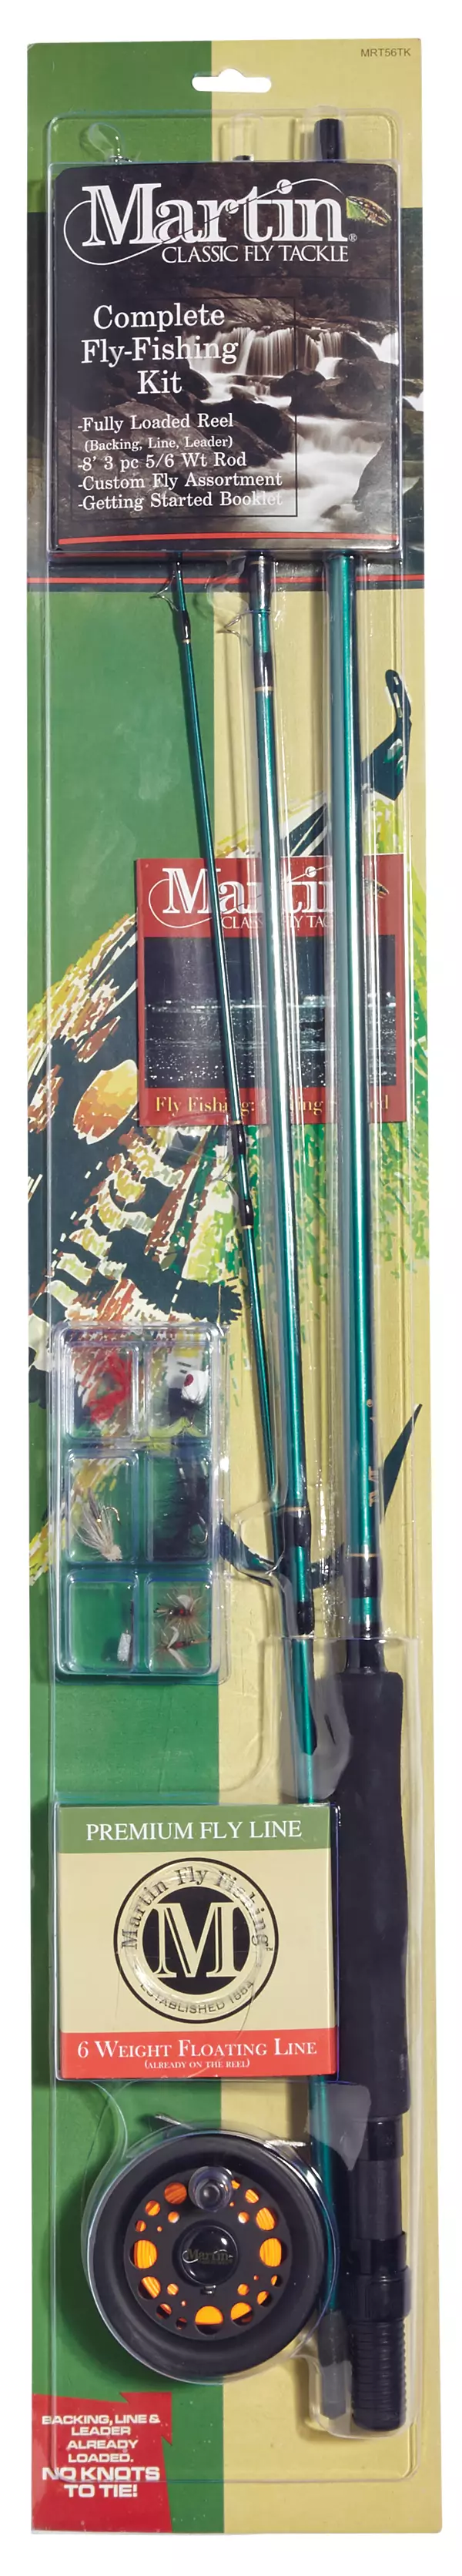 Zebco Martin Complete Fly Fishing Kit Combo Rod and Reel